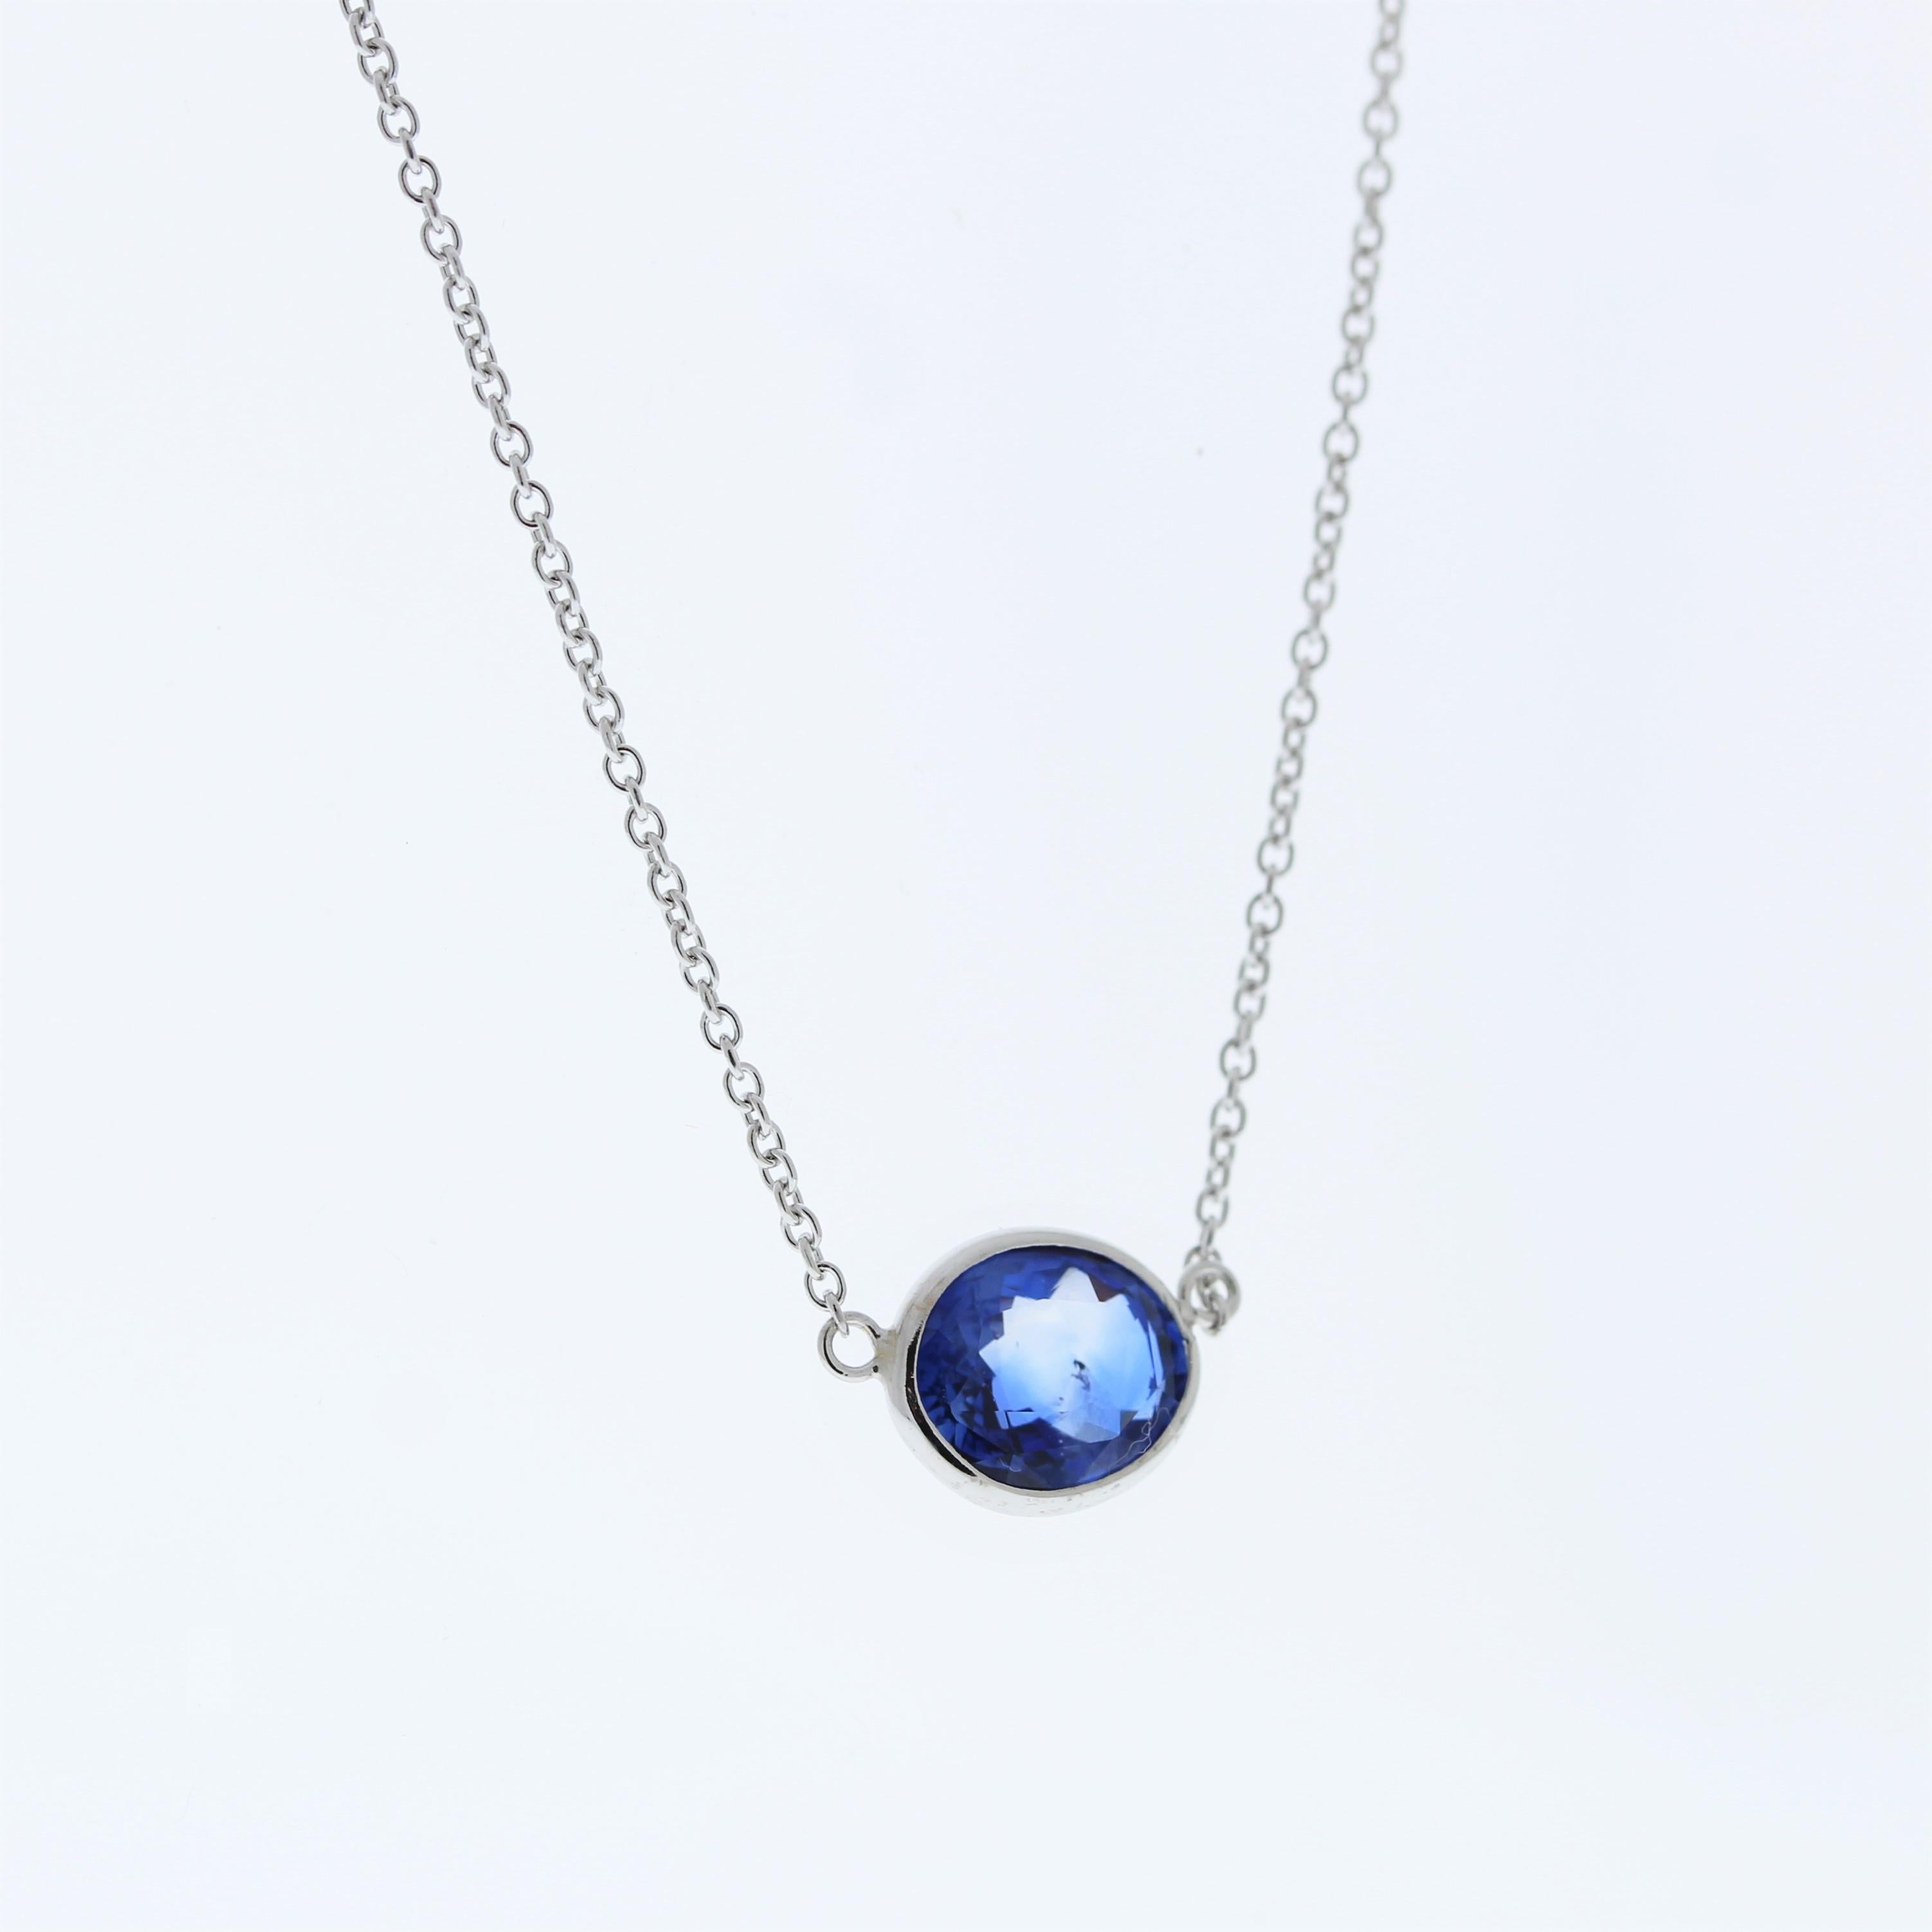 The necklace features a 2.76-carat oval-cut blue sapphire set in a 14 karat white gold pendant or setting. The combination of the blue sapphire and the white gold setting is likely to create an elegant and captivating piece of jewelry that can